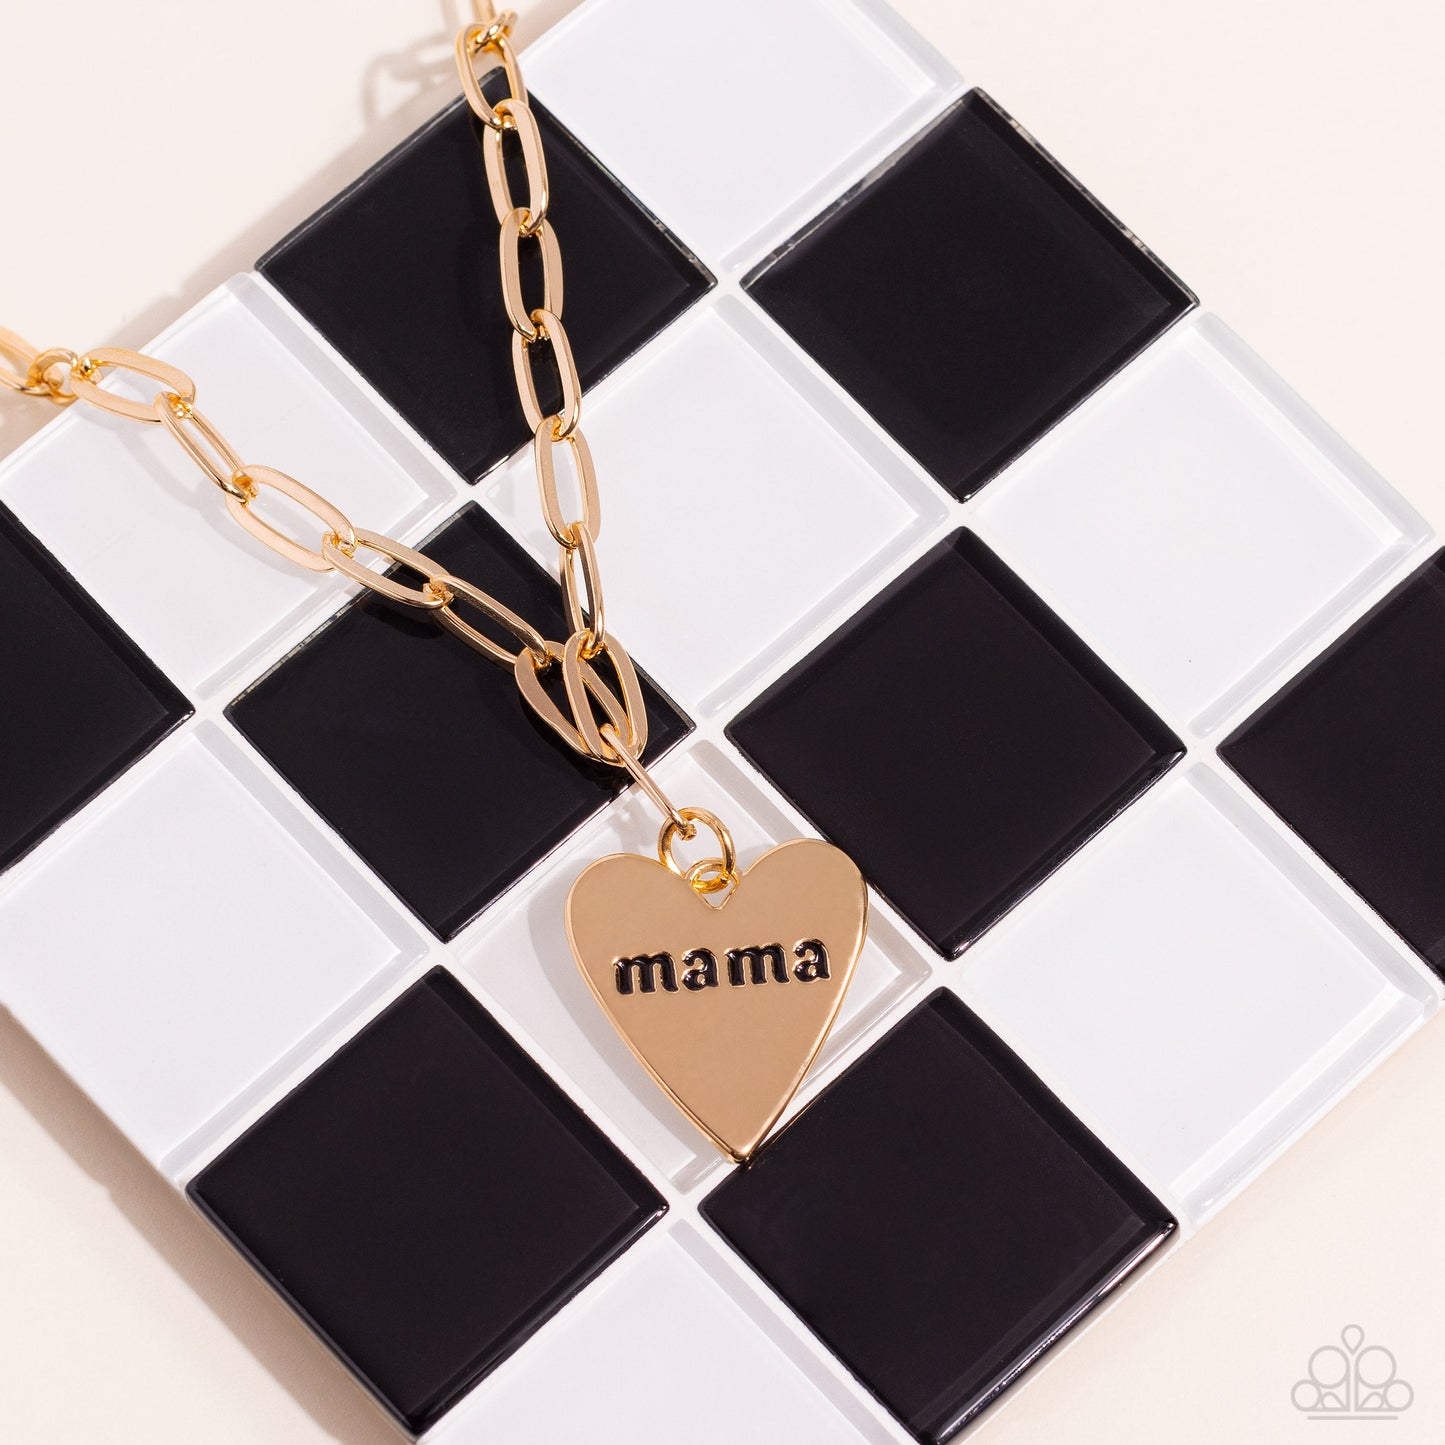 Mama Cant Buy You Love - Gold "Mama" Engraved Heart Pendant Paparazzi Necklace & matching earrings